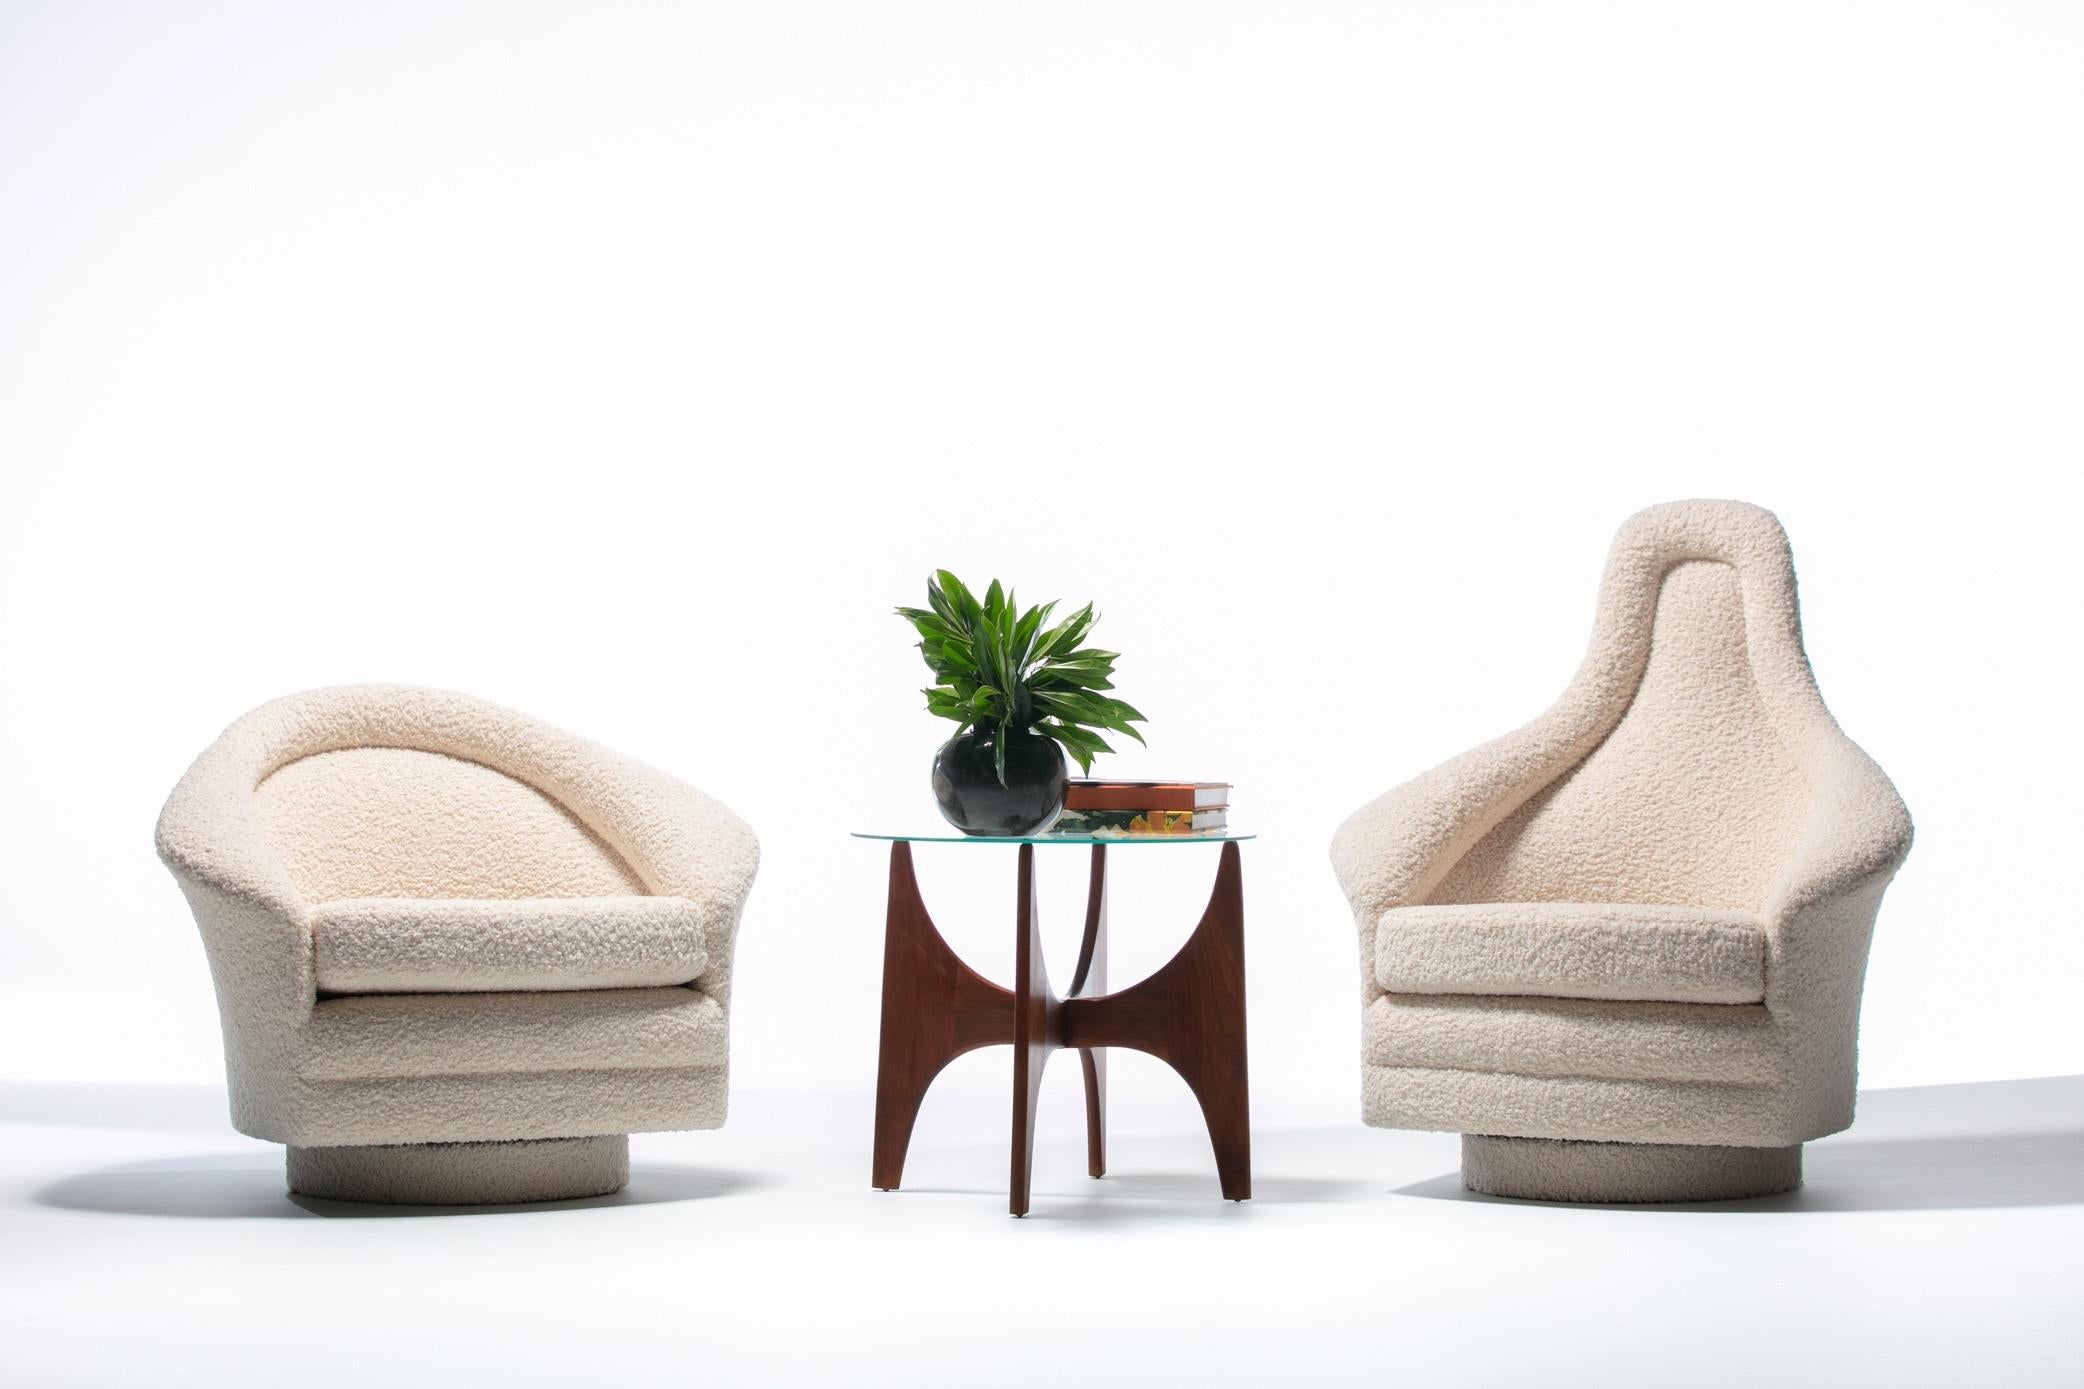 Sculptural Mom & Pop swivel chairs by Adrian Pearsall for Craft Associates circa 1970 freshly and professionally reupholstered in luxurious Ivory Bouclé. Furniture that's art. Arms gently slope out like a blossoming tulip. An overstuffed cushion